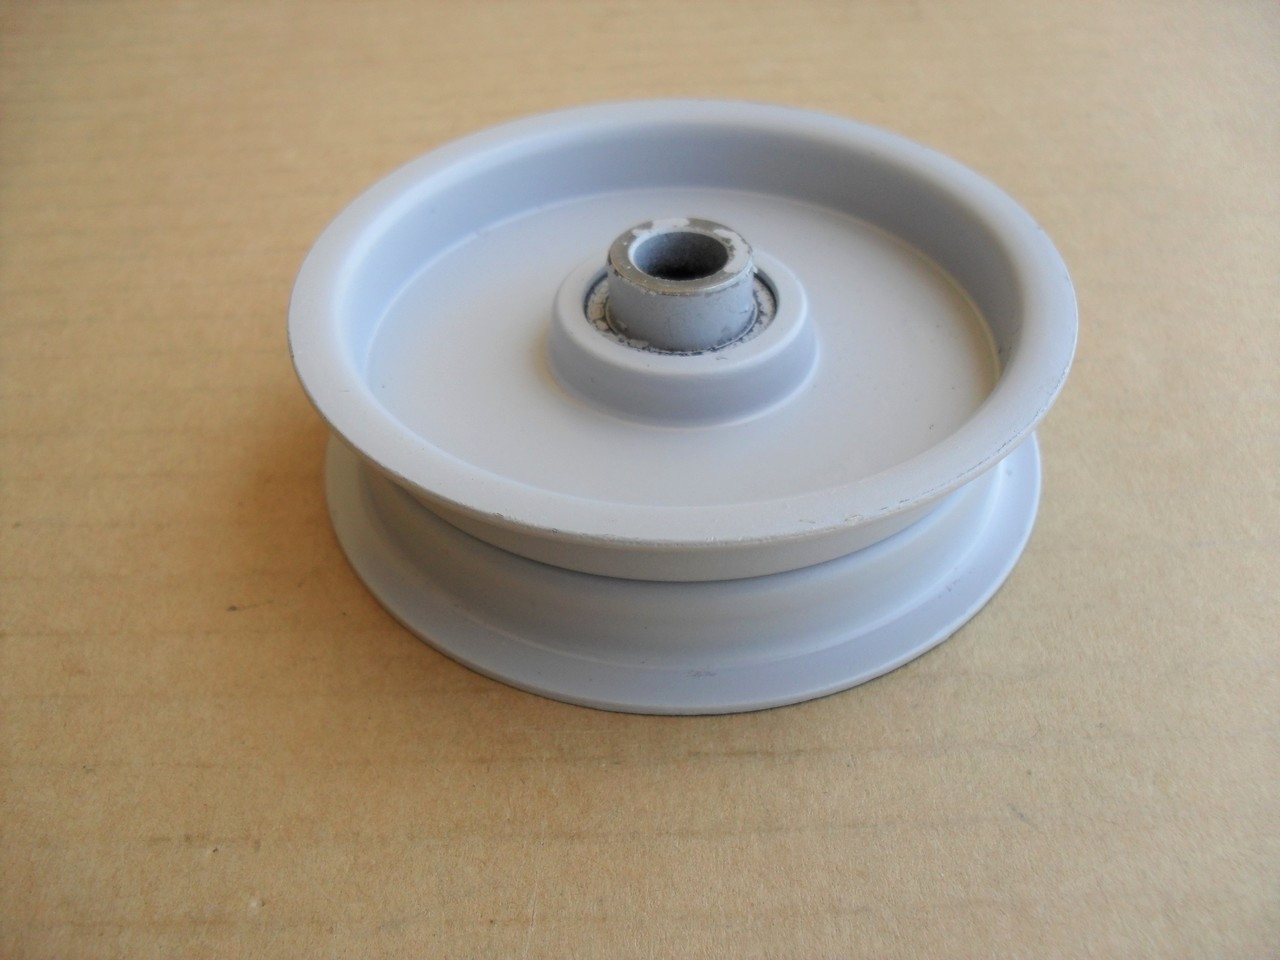 Idler Pulley for Case C18966, C28025 Made In USA Height: 7/8" ID: 3/8" OD: 3-1/8"